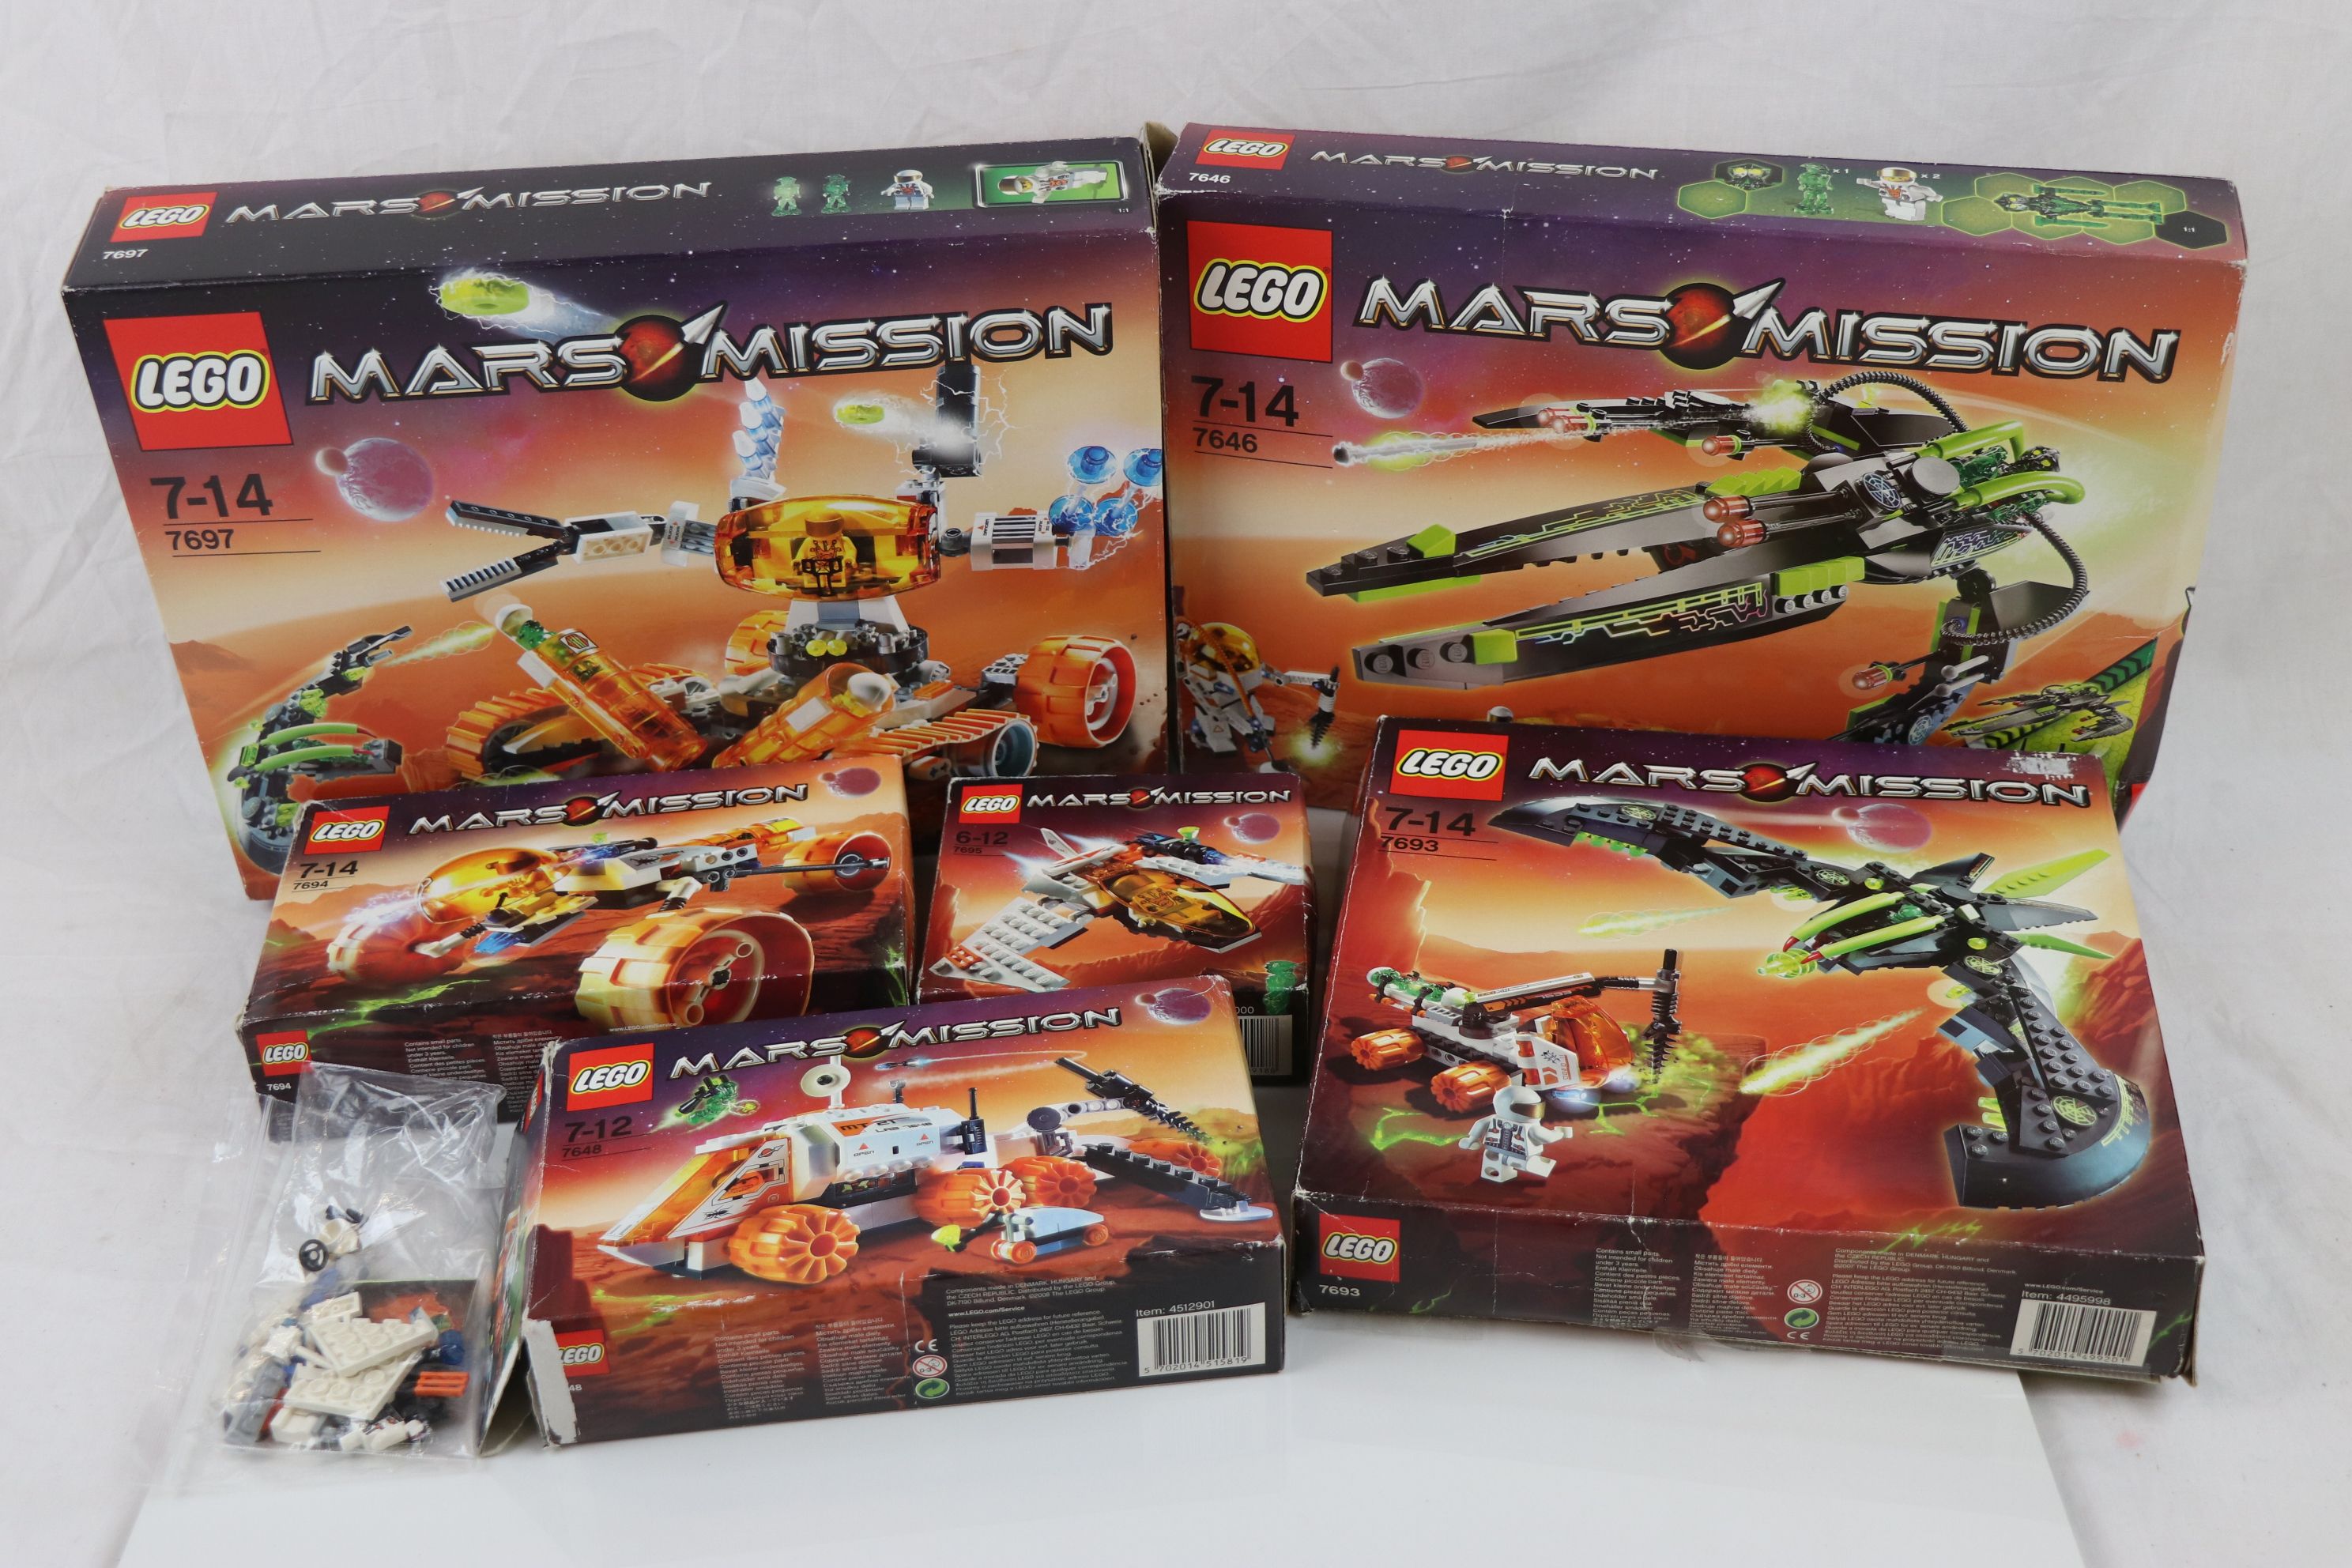 Six boxed Lego Mars Mission sets to include 7693, 7646, 7697, 7648, 7695 & 7694, plus an unboxed